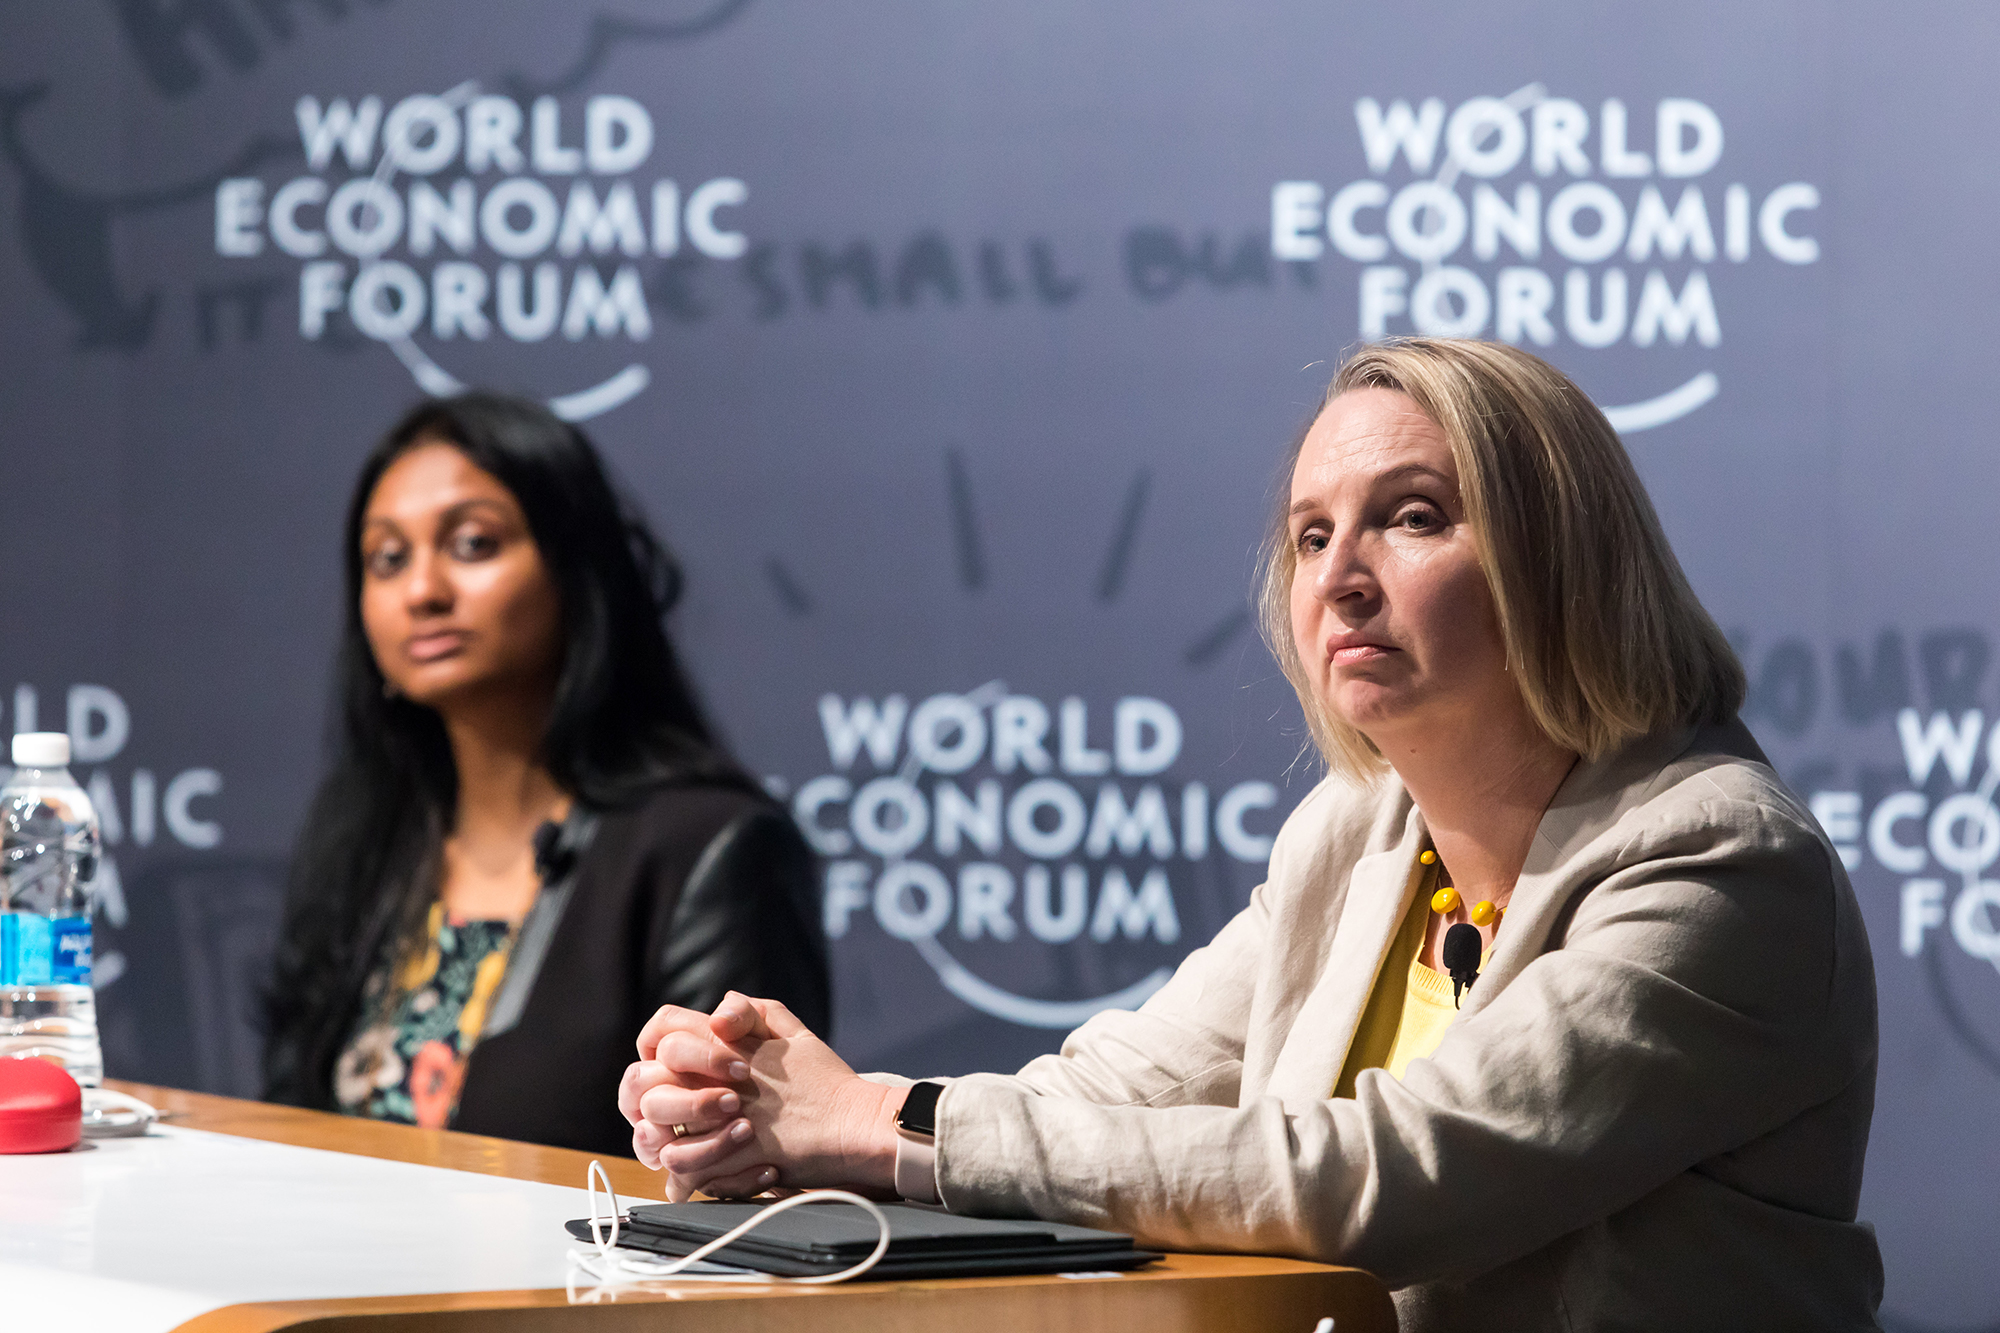 Dr Sheetal Silal and Professor Elmi Muller at the UCT IdeasLab on innovative research into infectious diseases at the World Economic Forum Annual Meeting